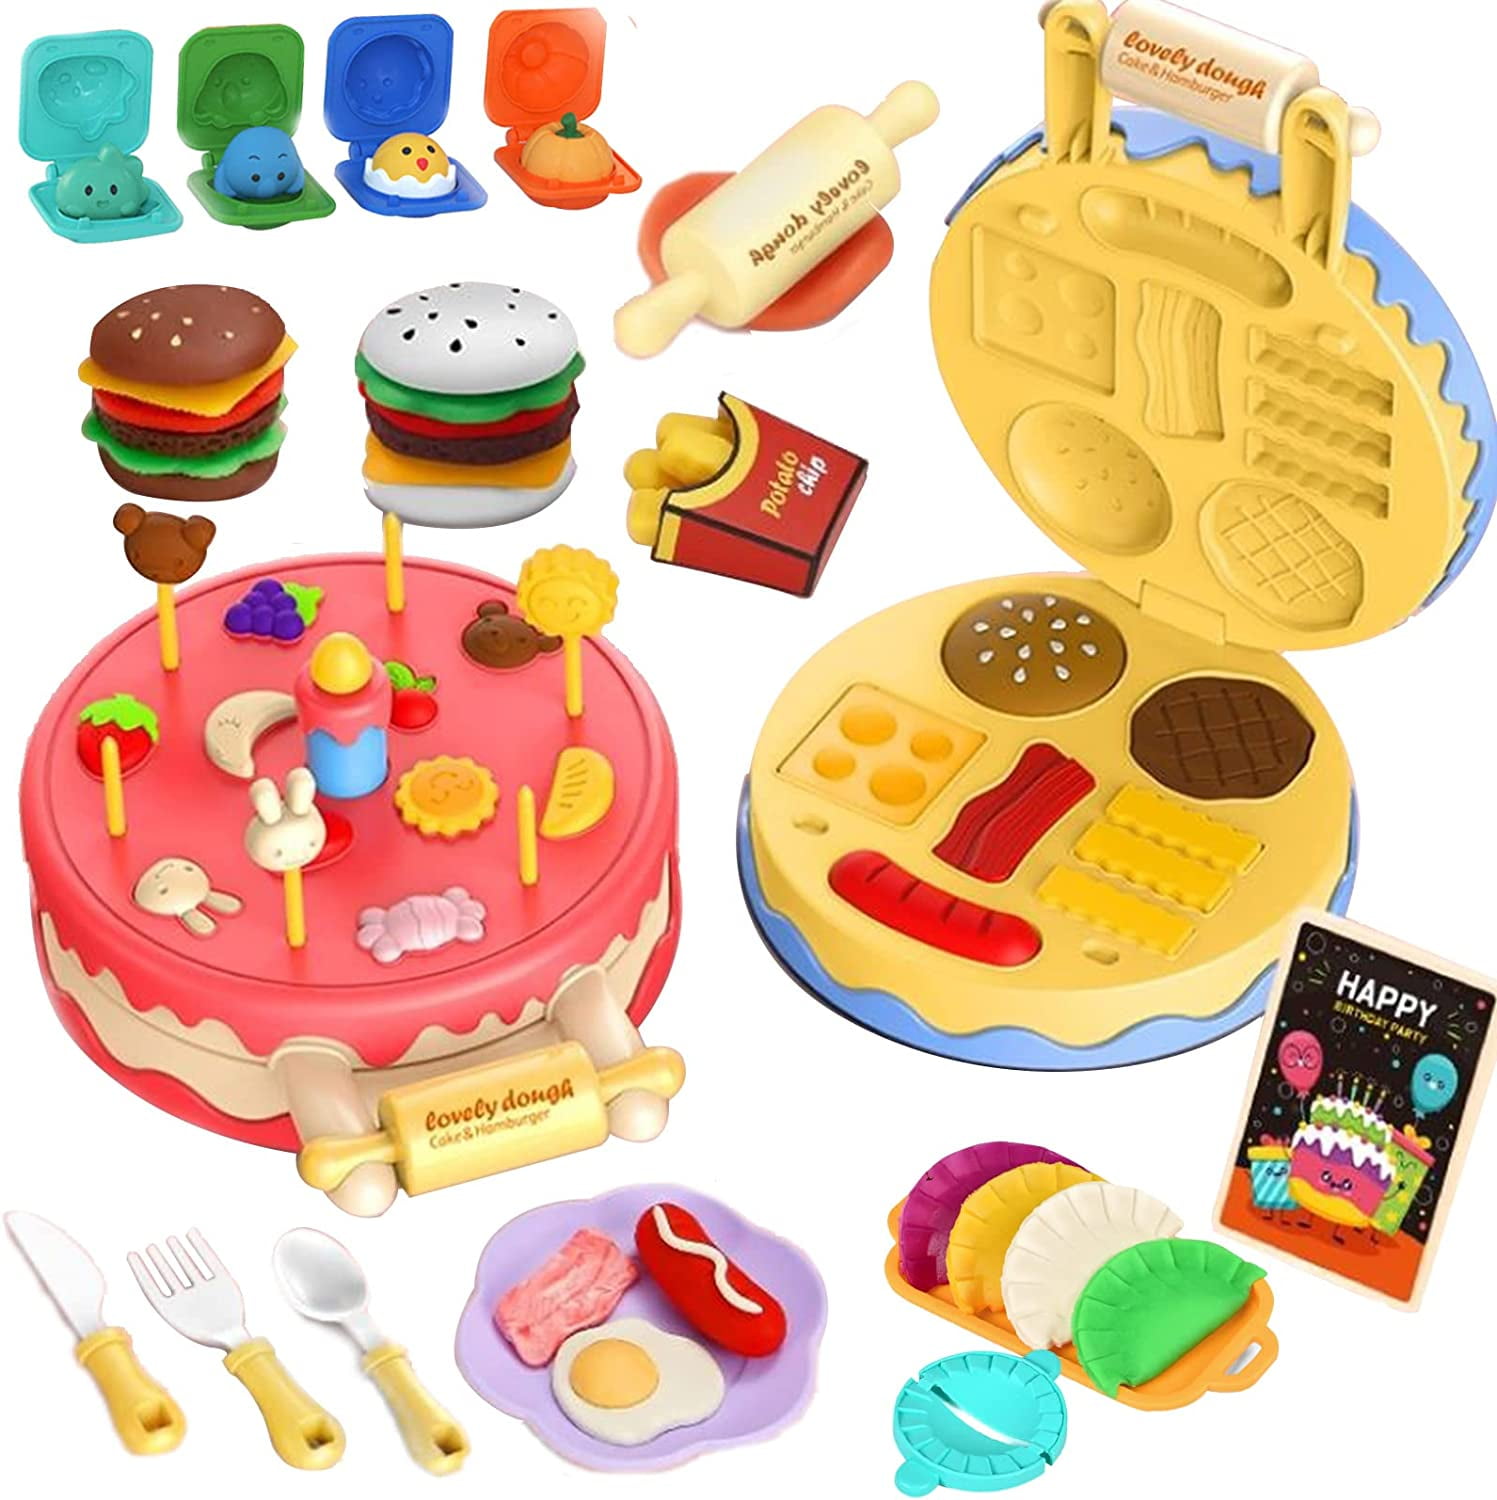 Play-Doh Noodle Party – Child's Play